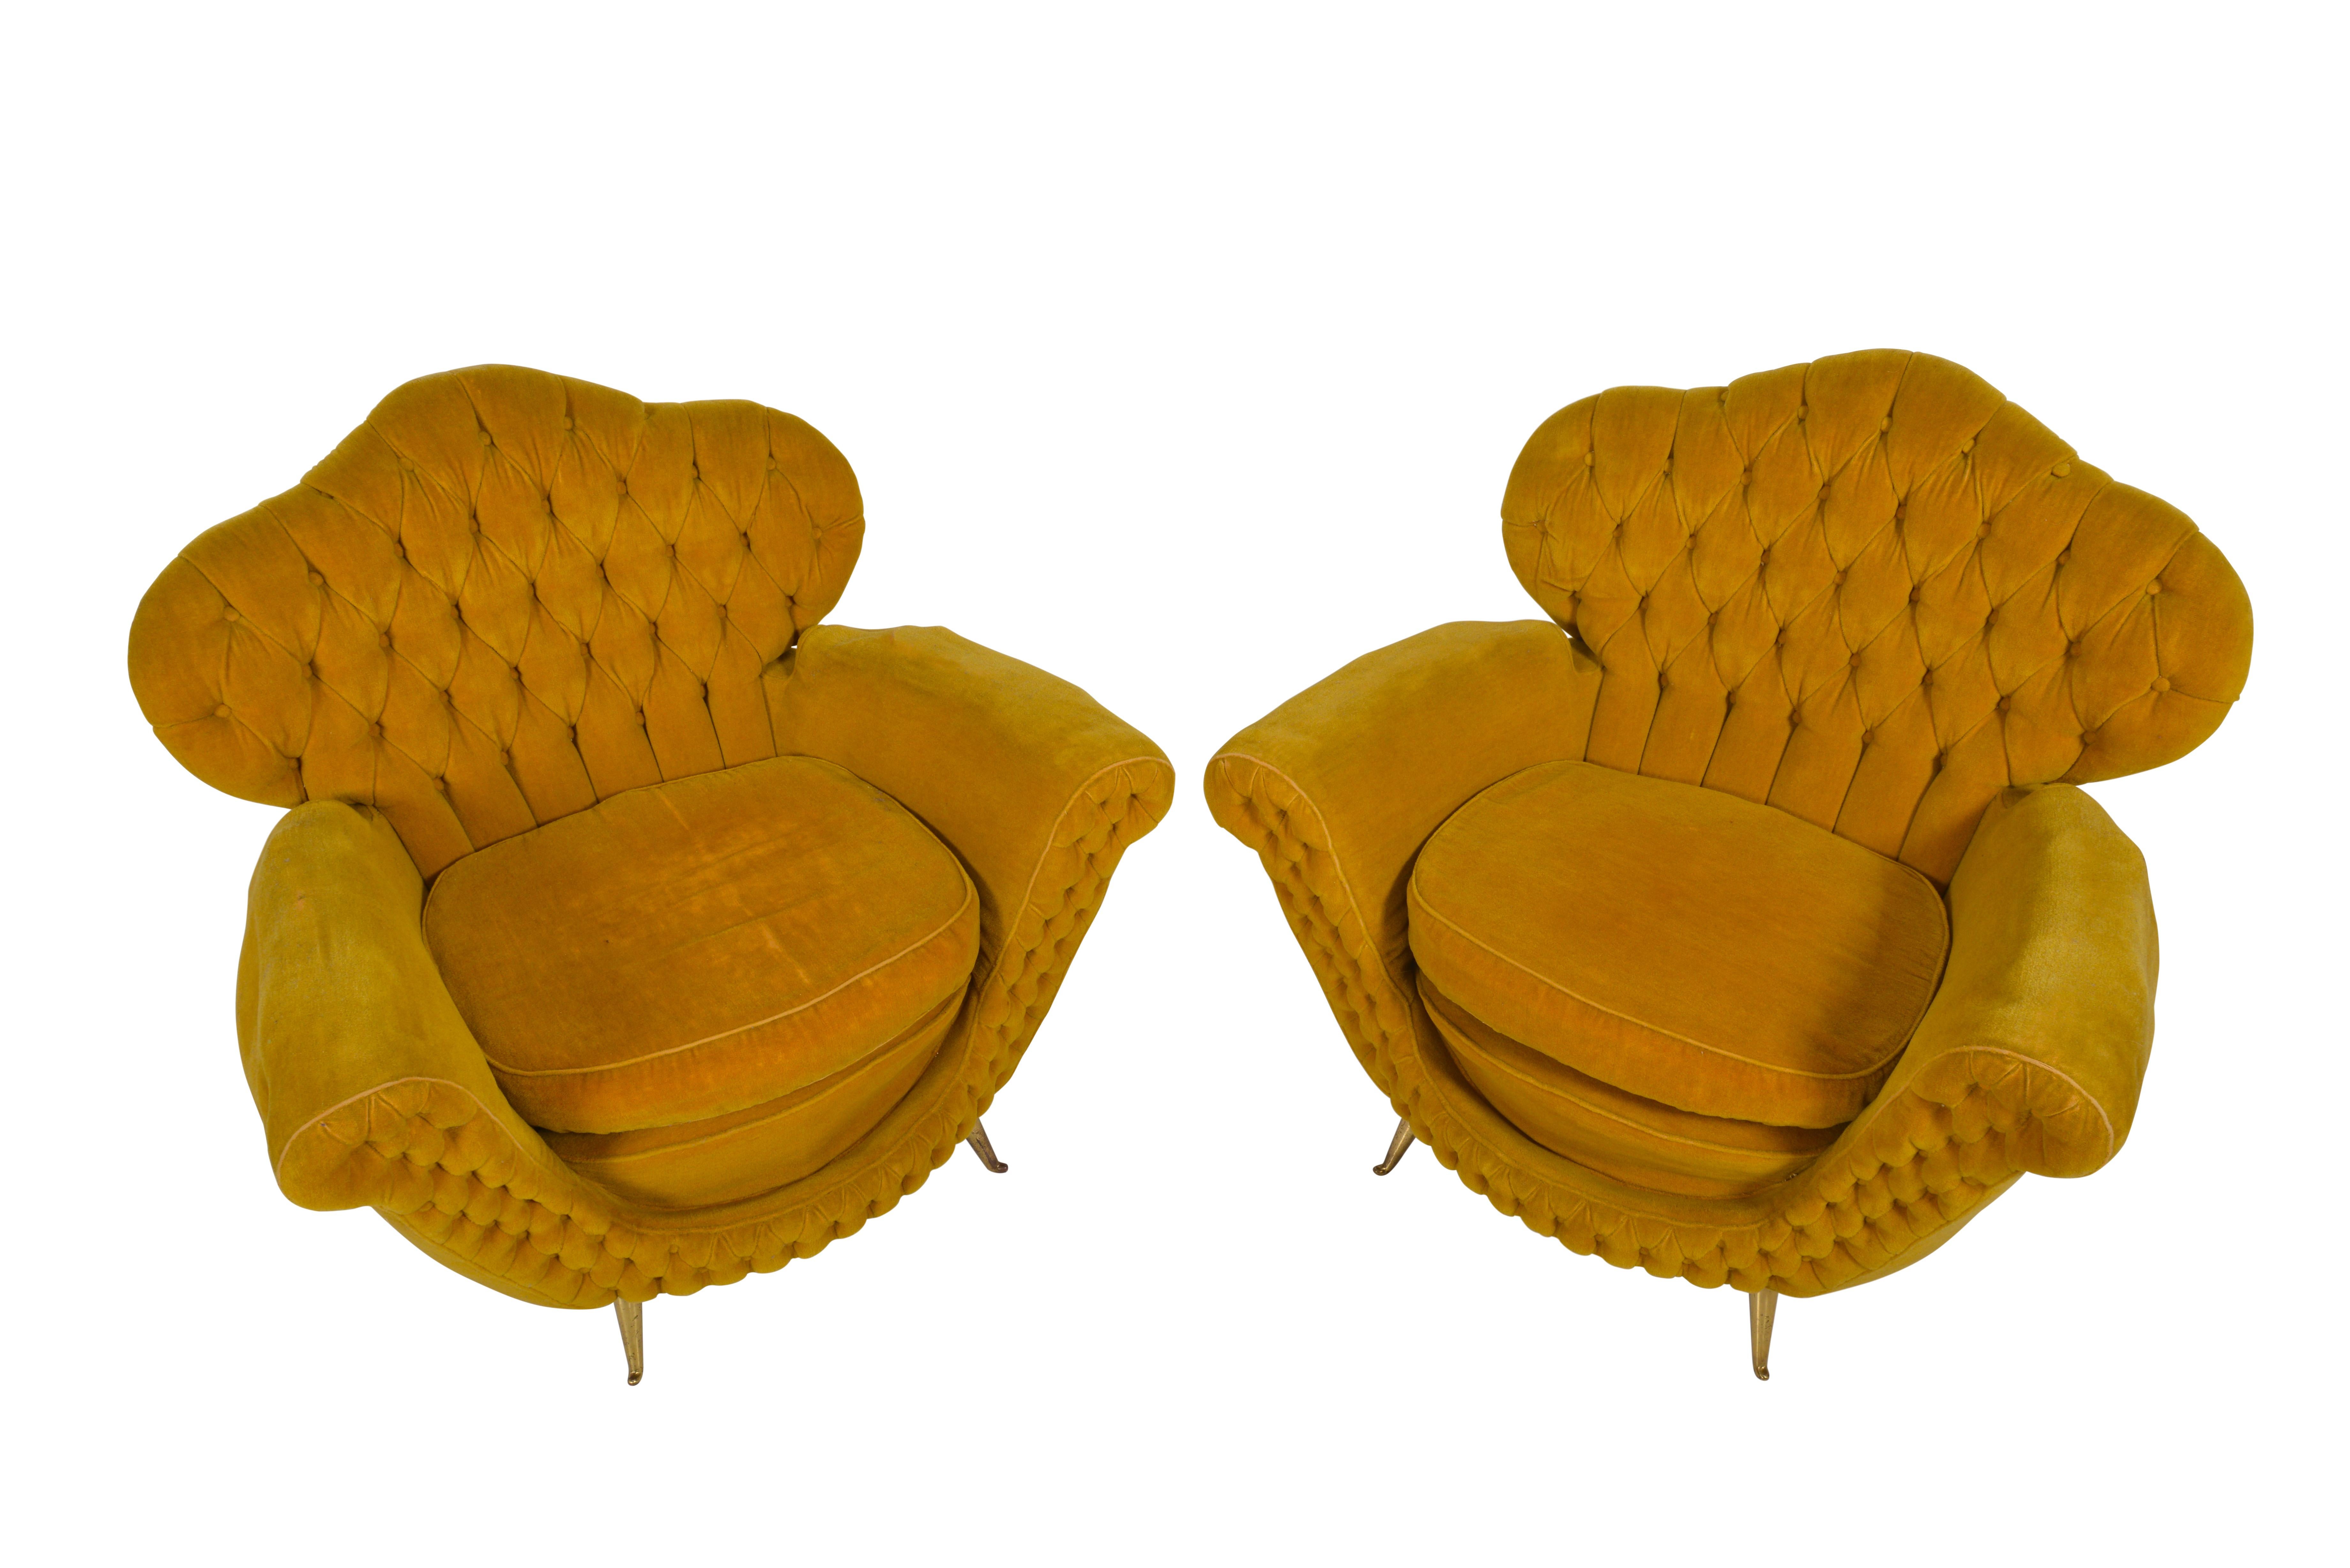 Most elegant and sinuously curved pair of Italian midcentury club chairs. Original button tufted gold colored mohair fabric. On copper legs.